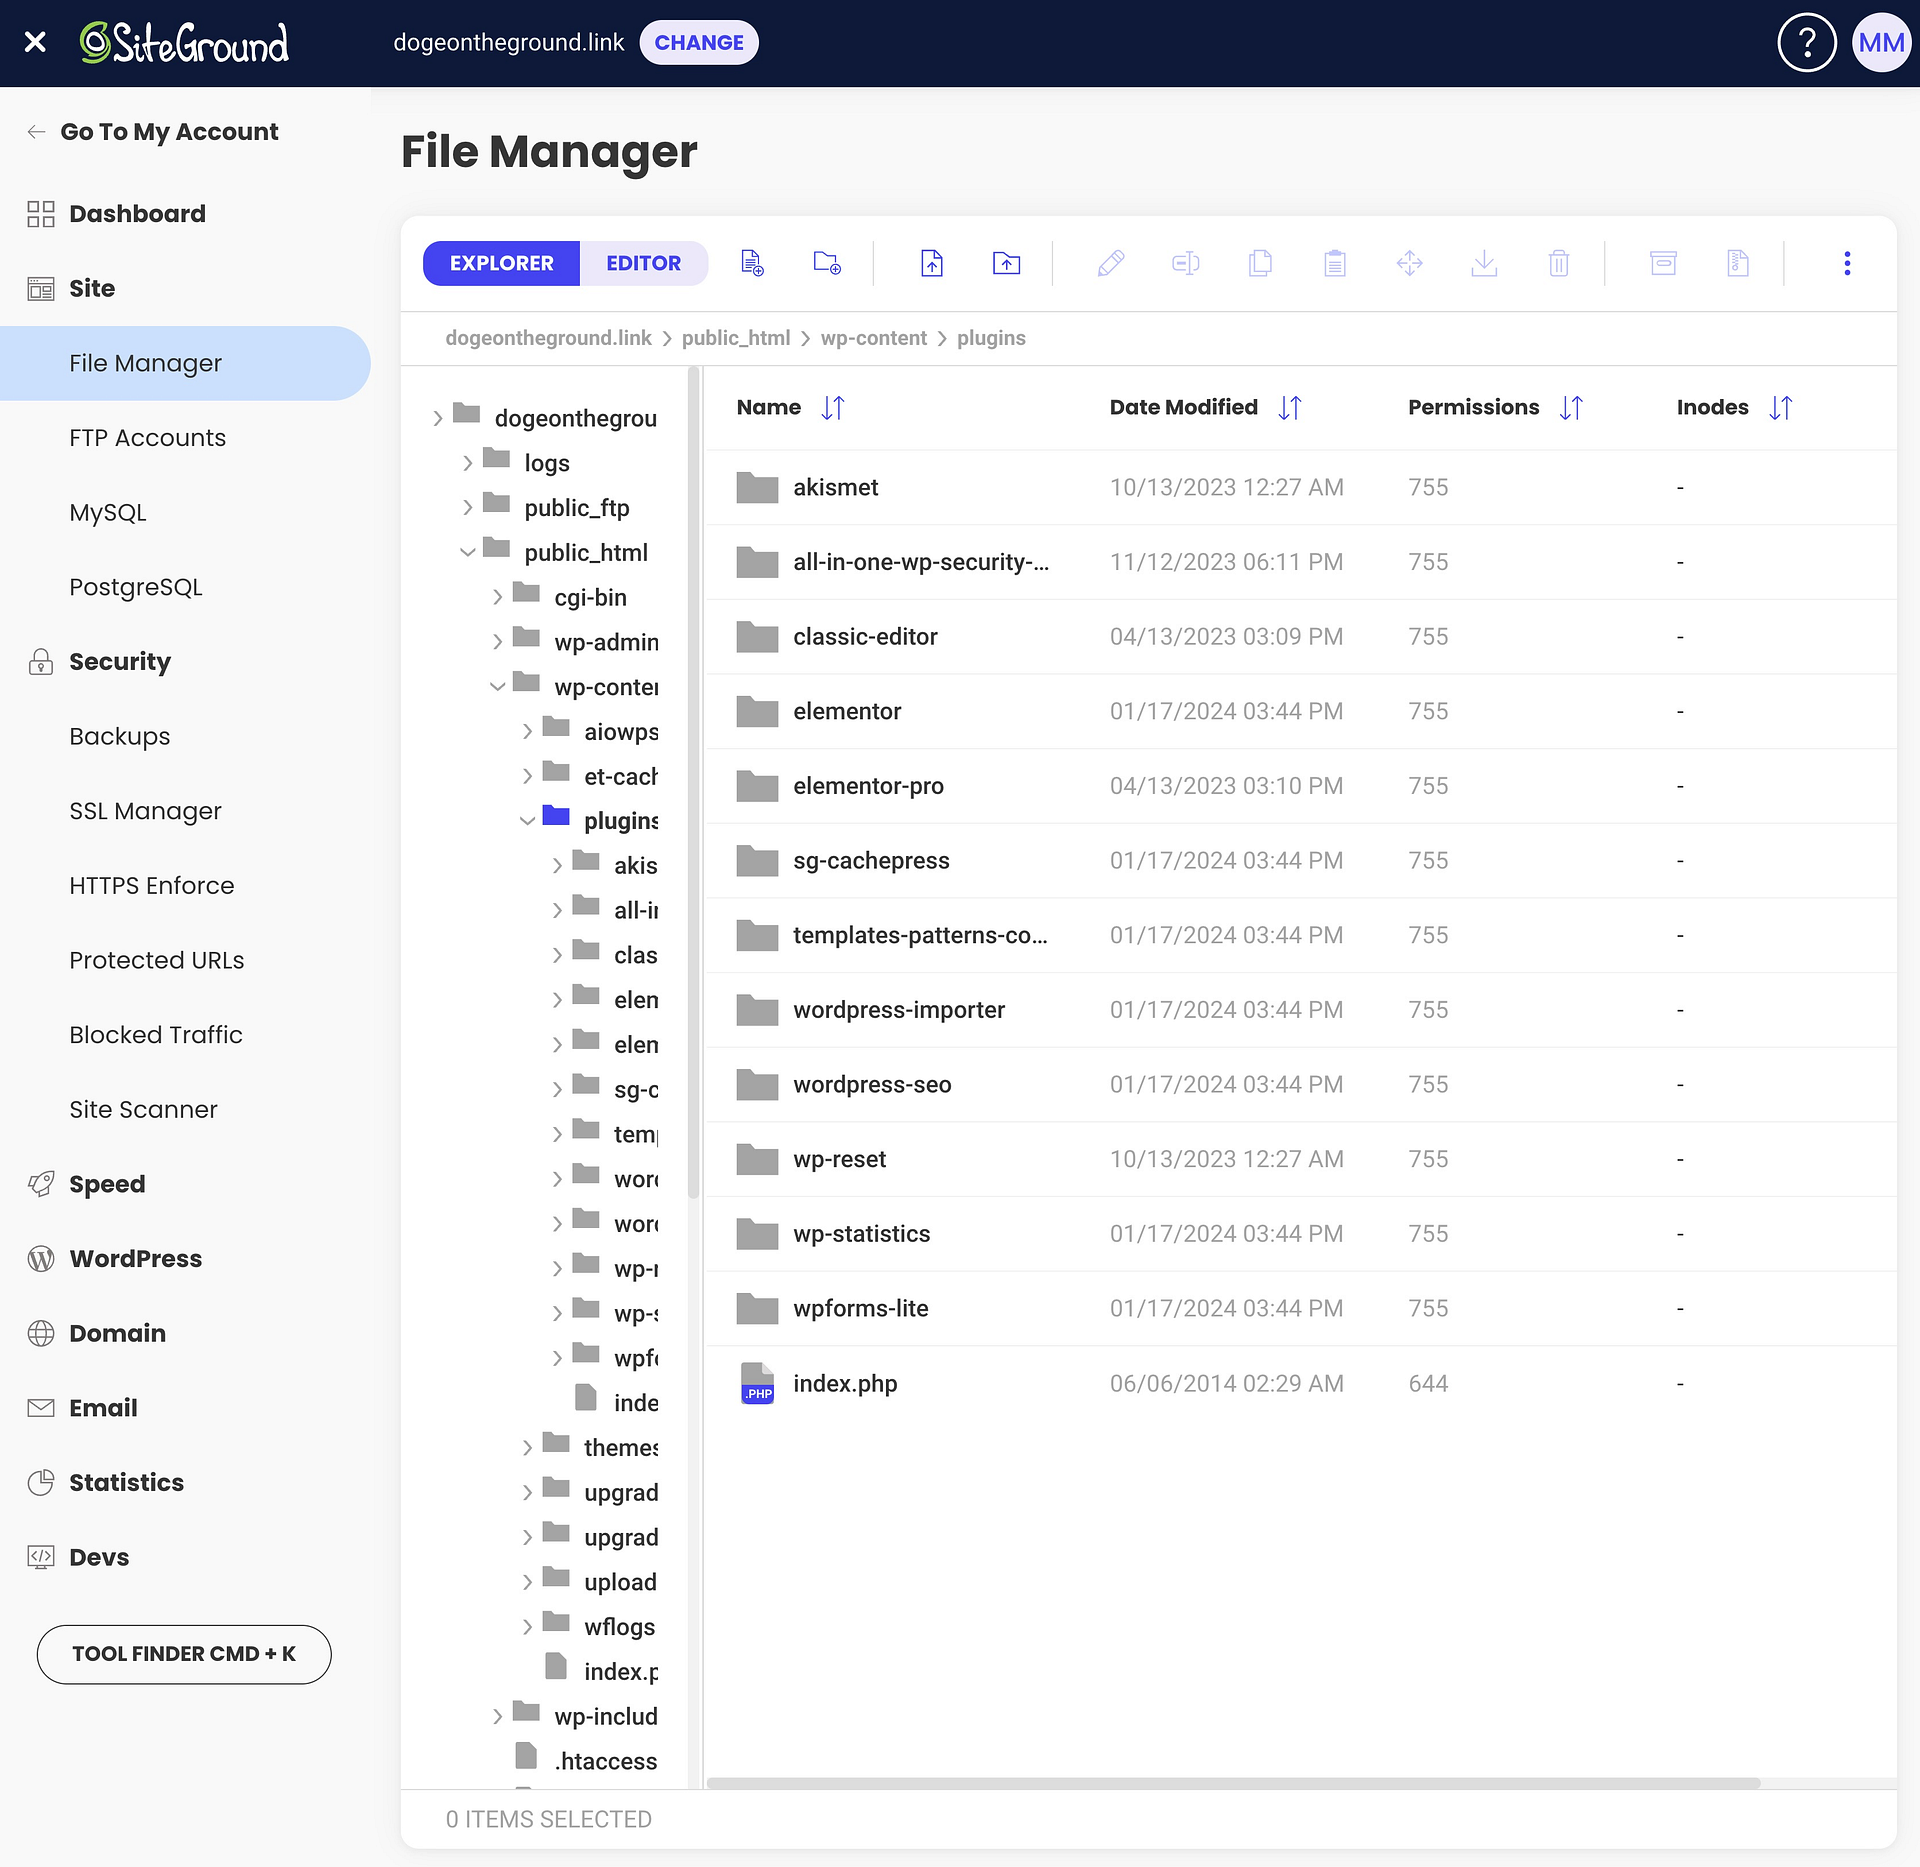 Herramienta SiteGround File Manager frente a Bluehost cPanel.